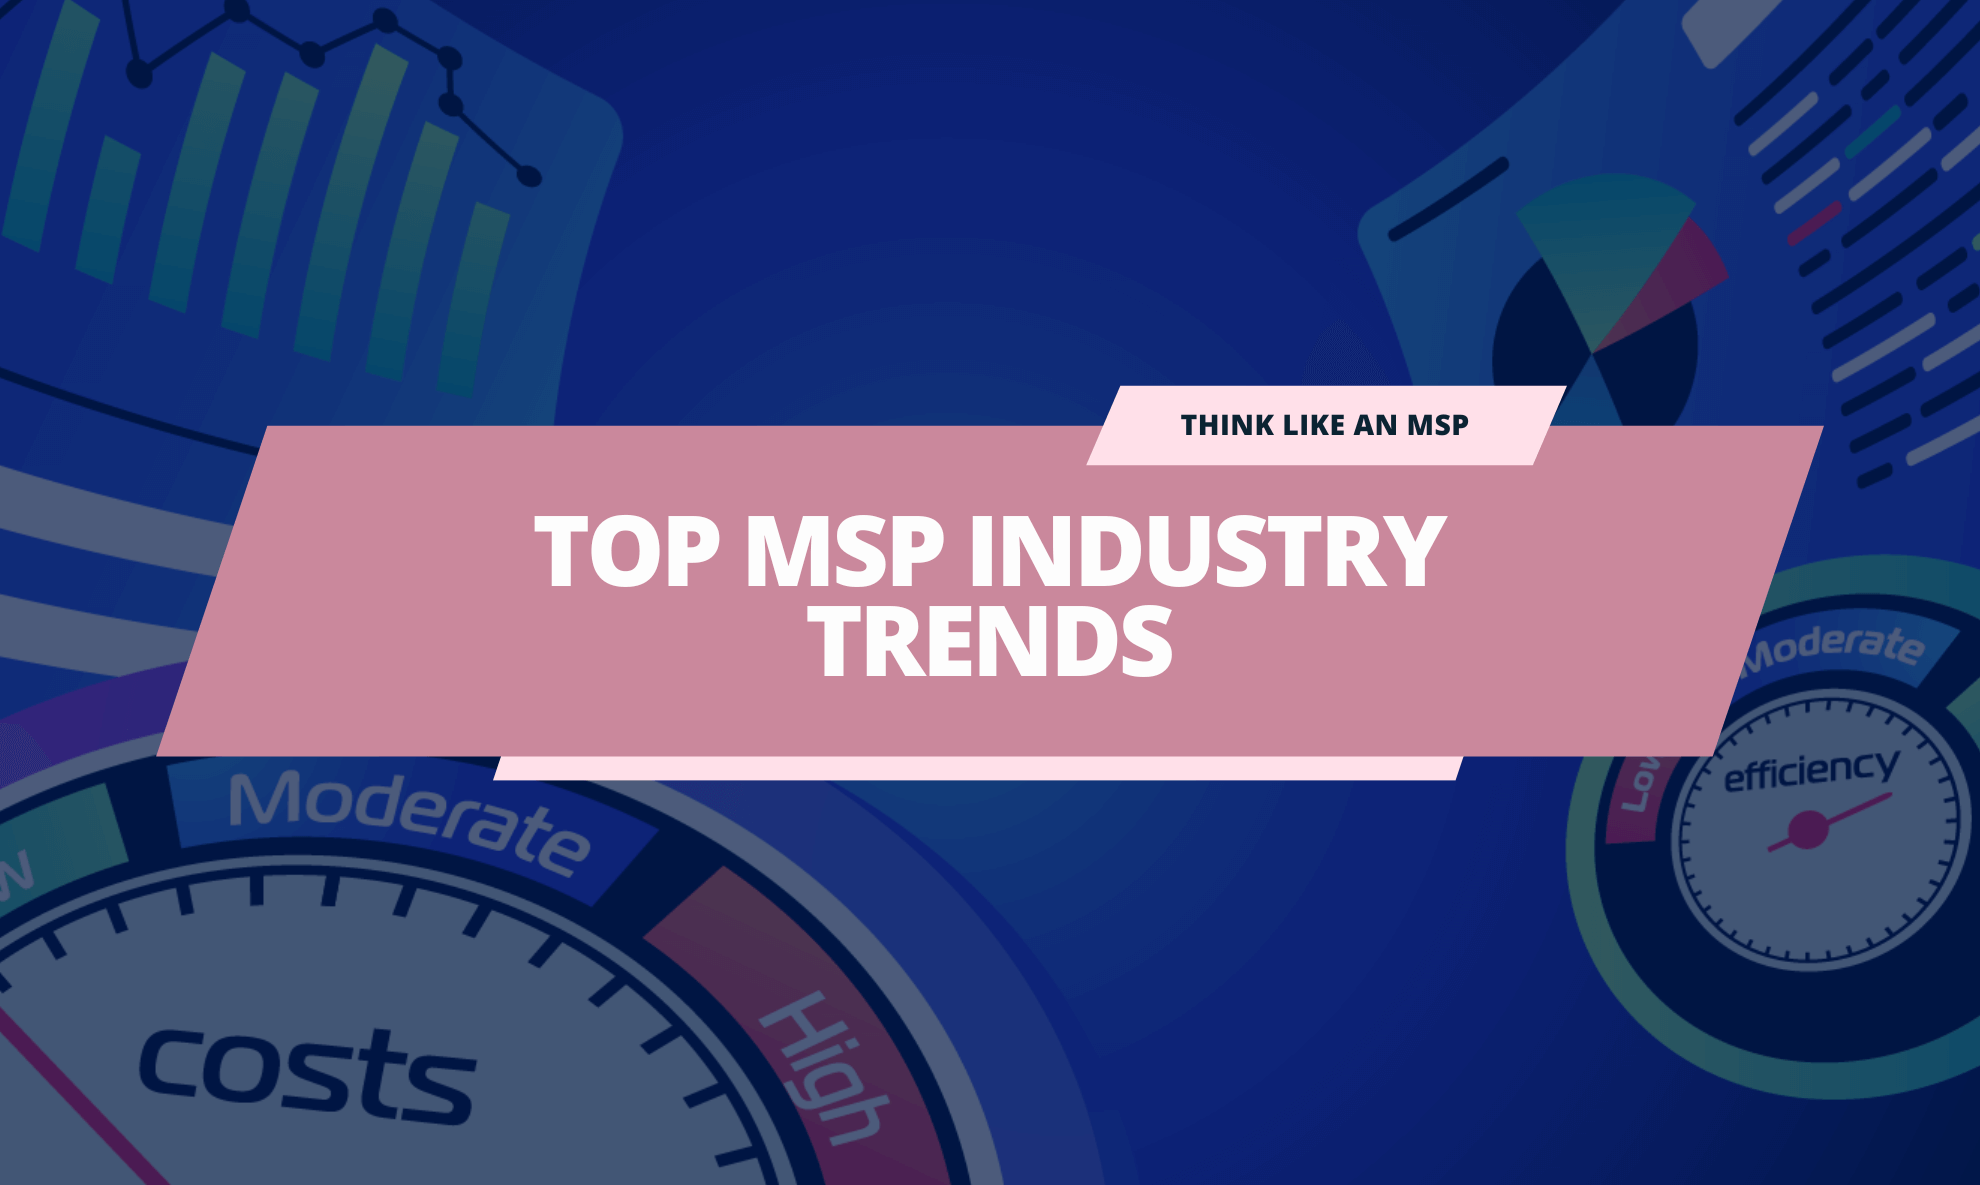 Shaping the Future of MSPs: Top 5 MSP Industry Trends